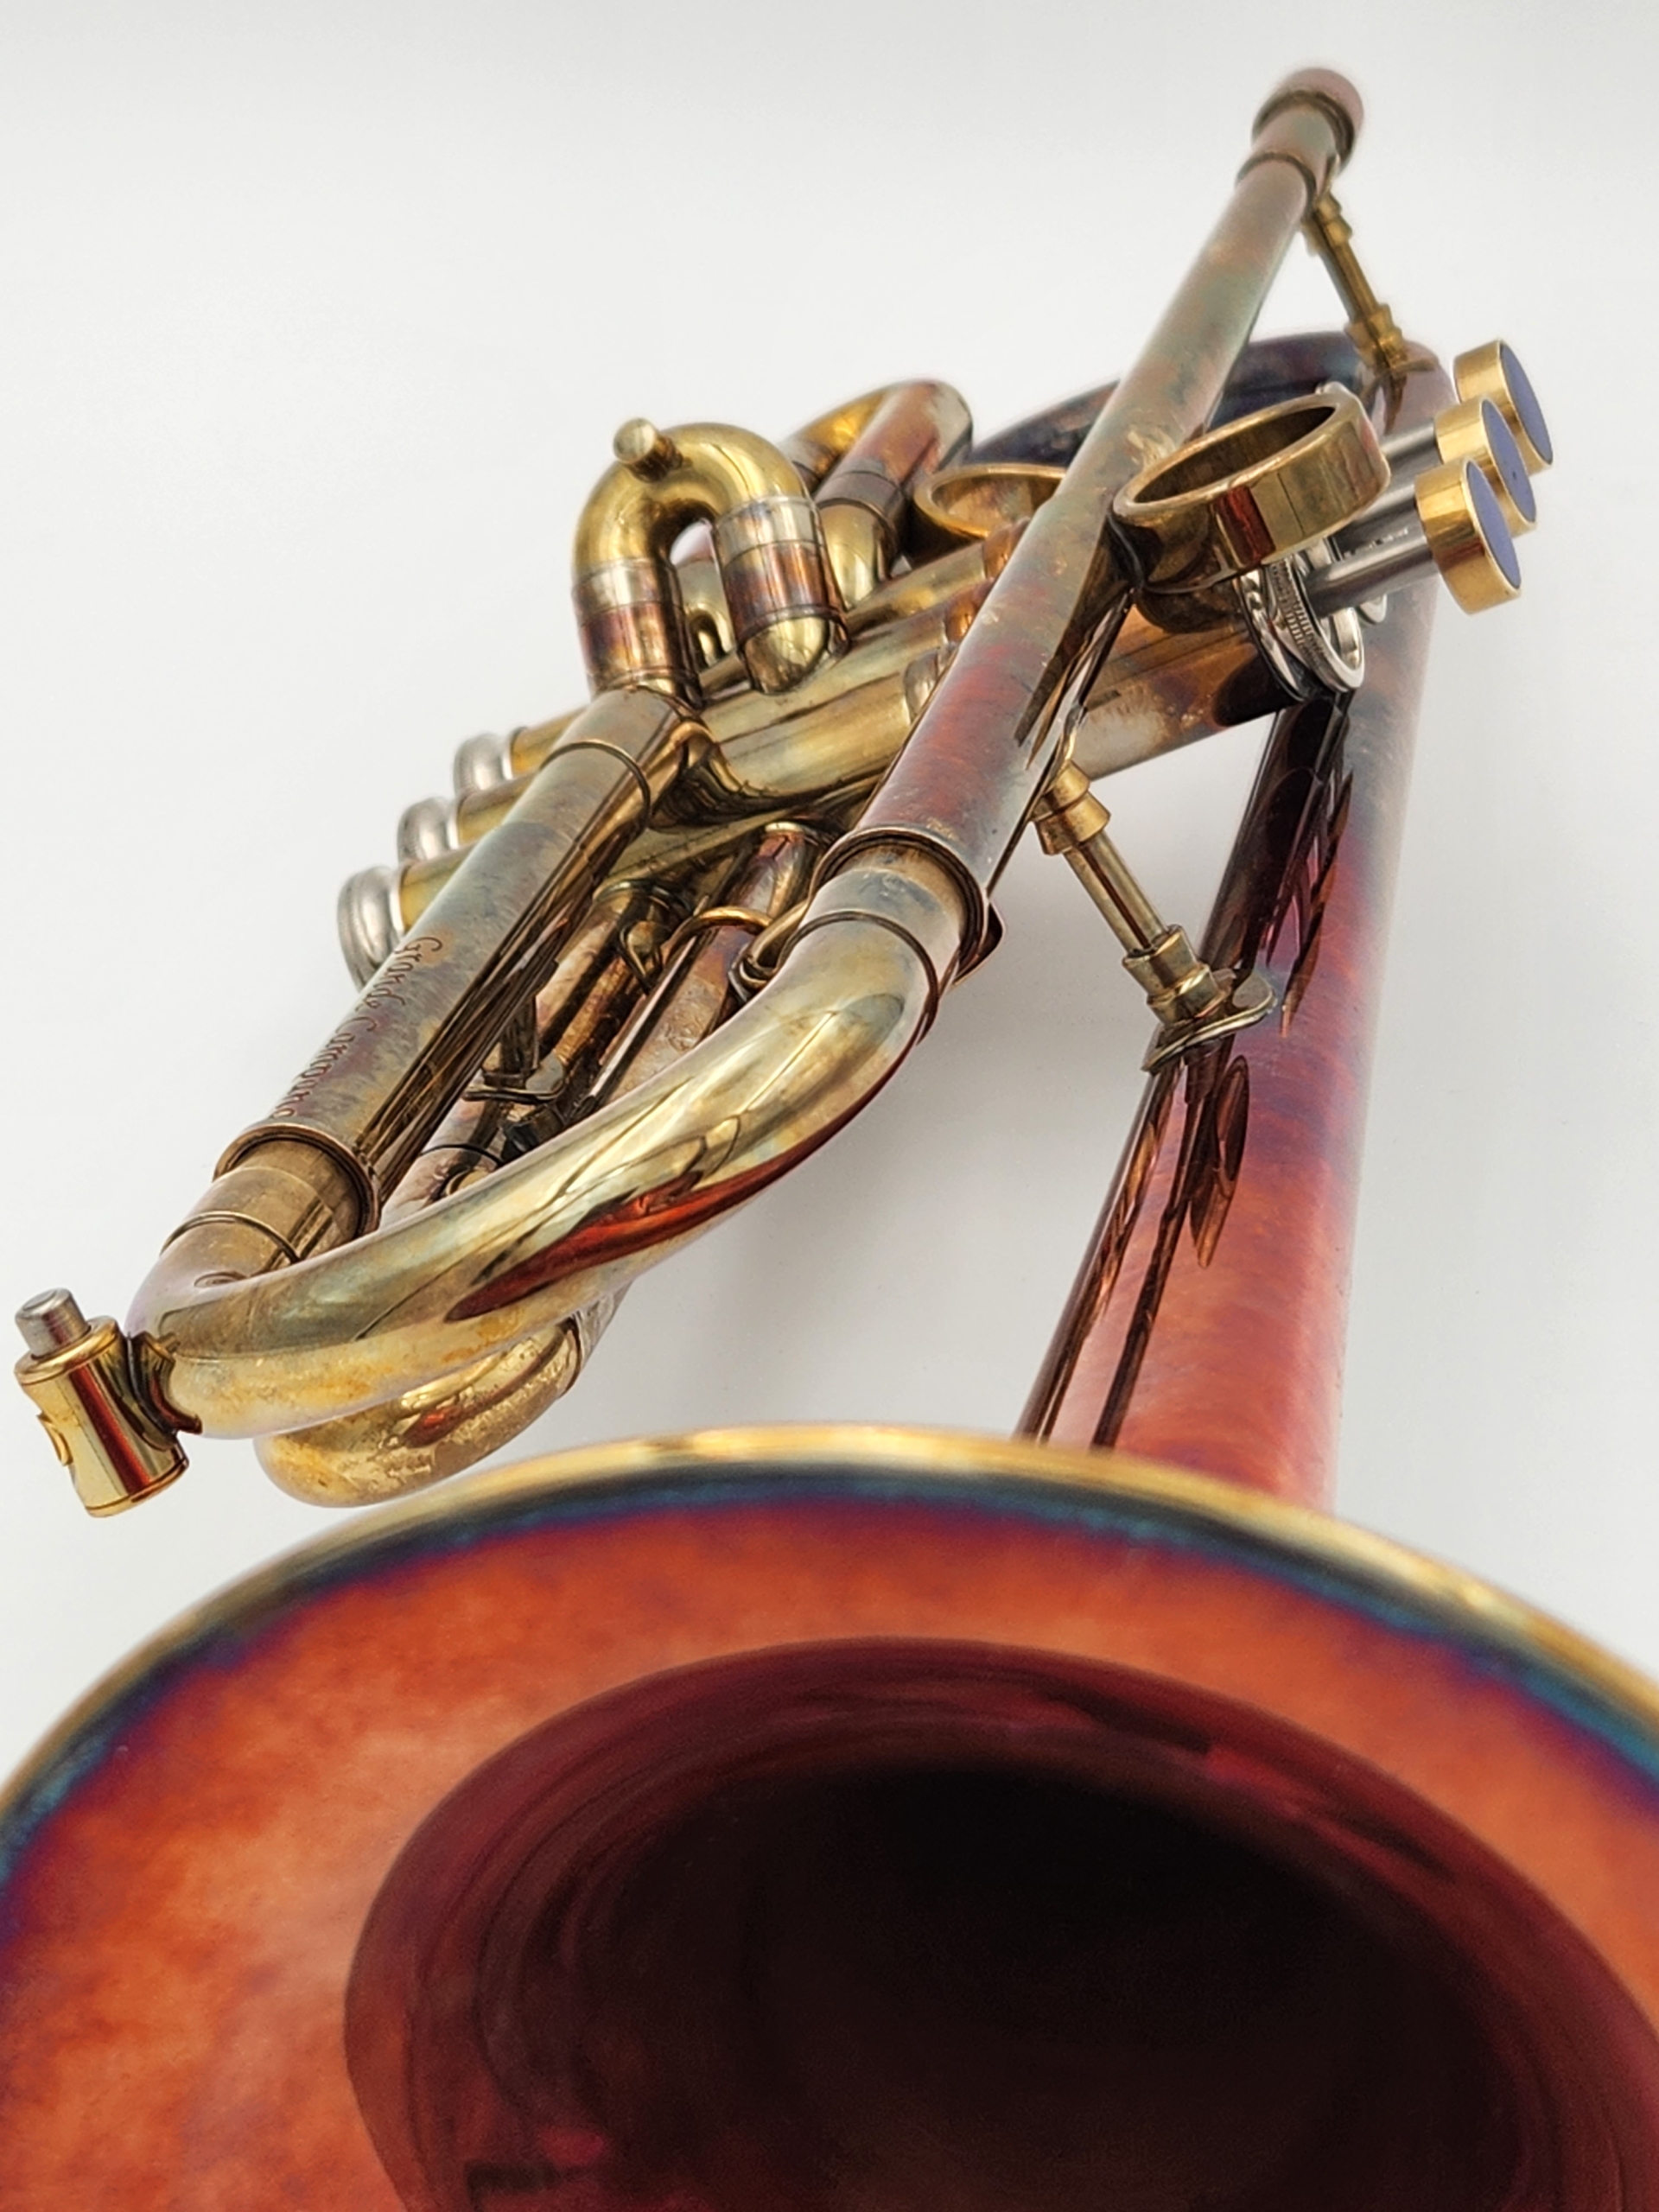 Del Quadro Custom Grande Campana trumpet with a 'I Spit Hot Fire' acid finish with lapis inlays